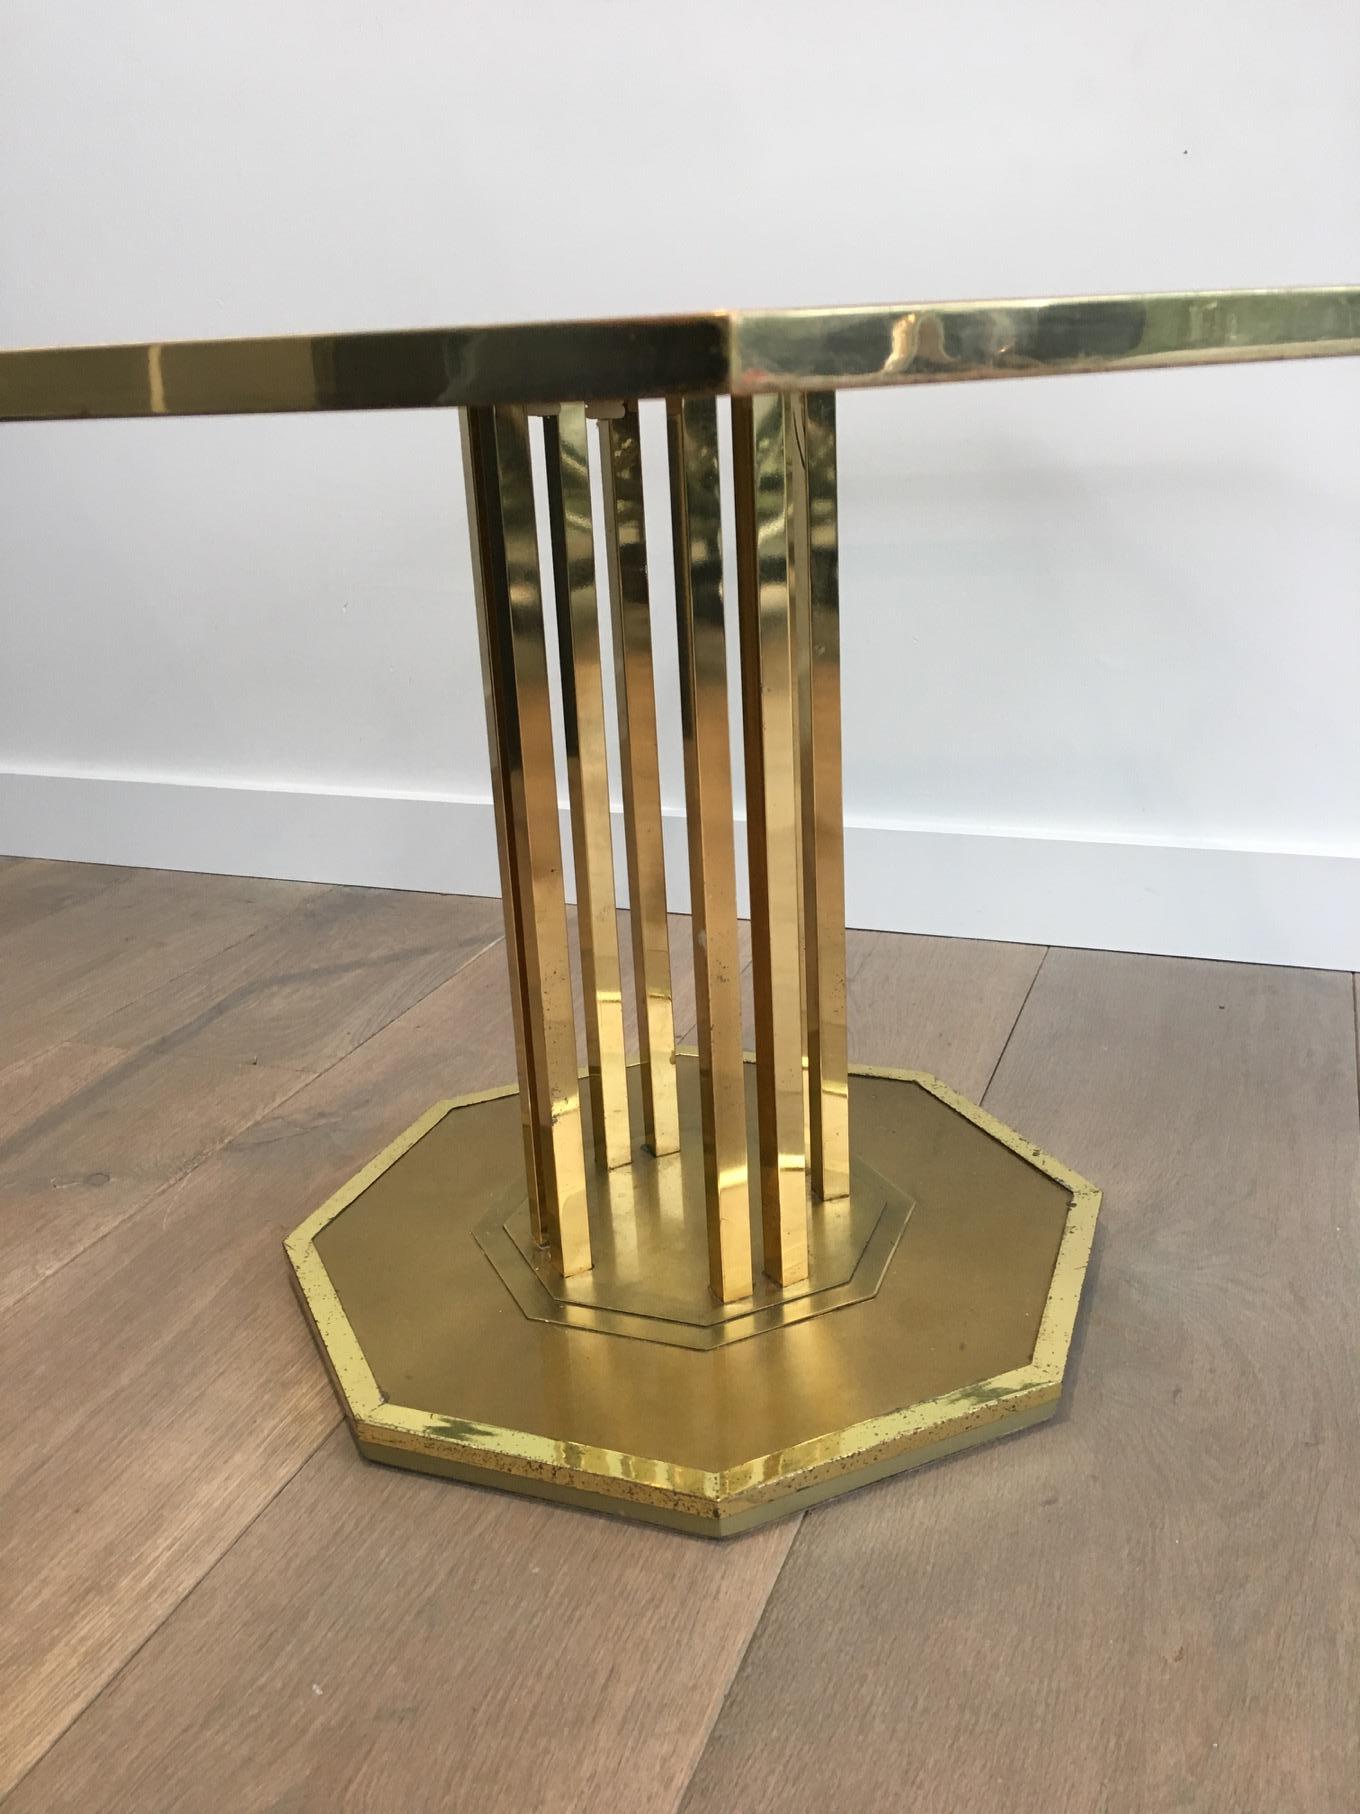 Rare Octagonal Brass and Glass Design Coffee Table, French, circa 1970 For Sale 4